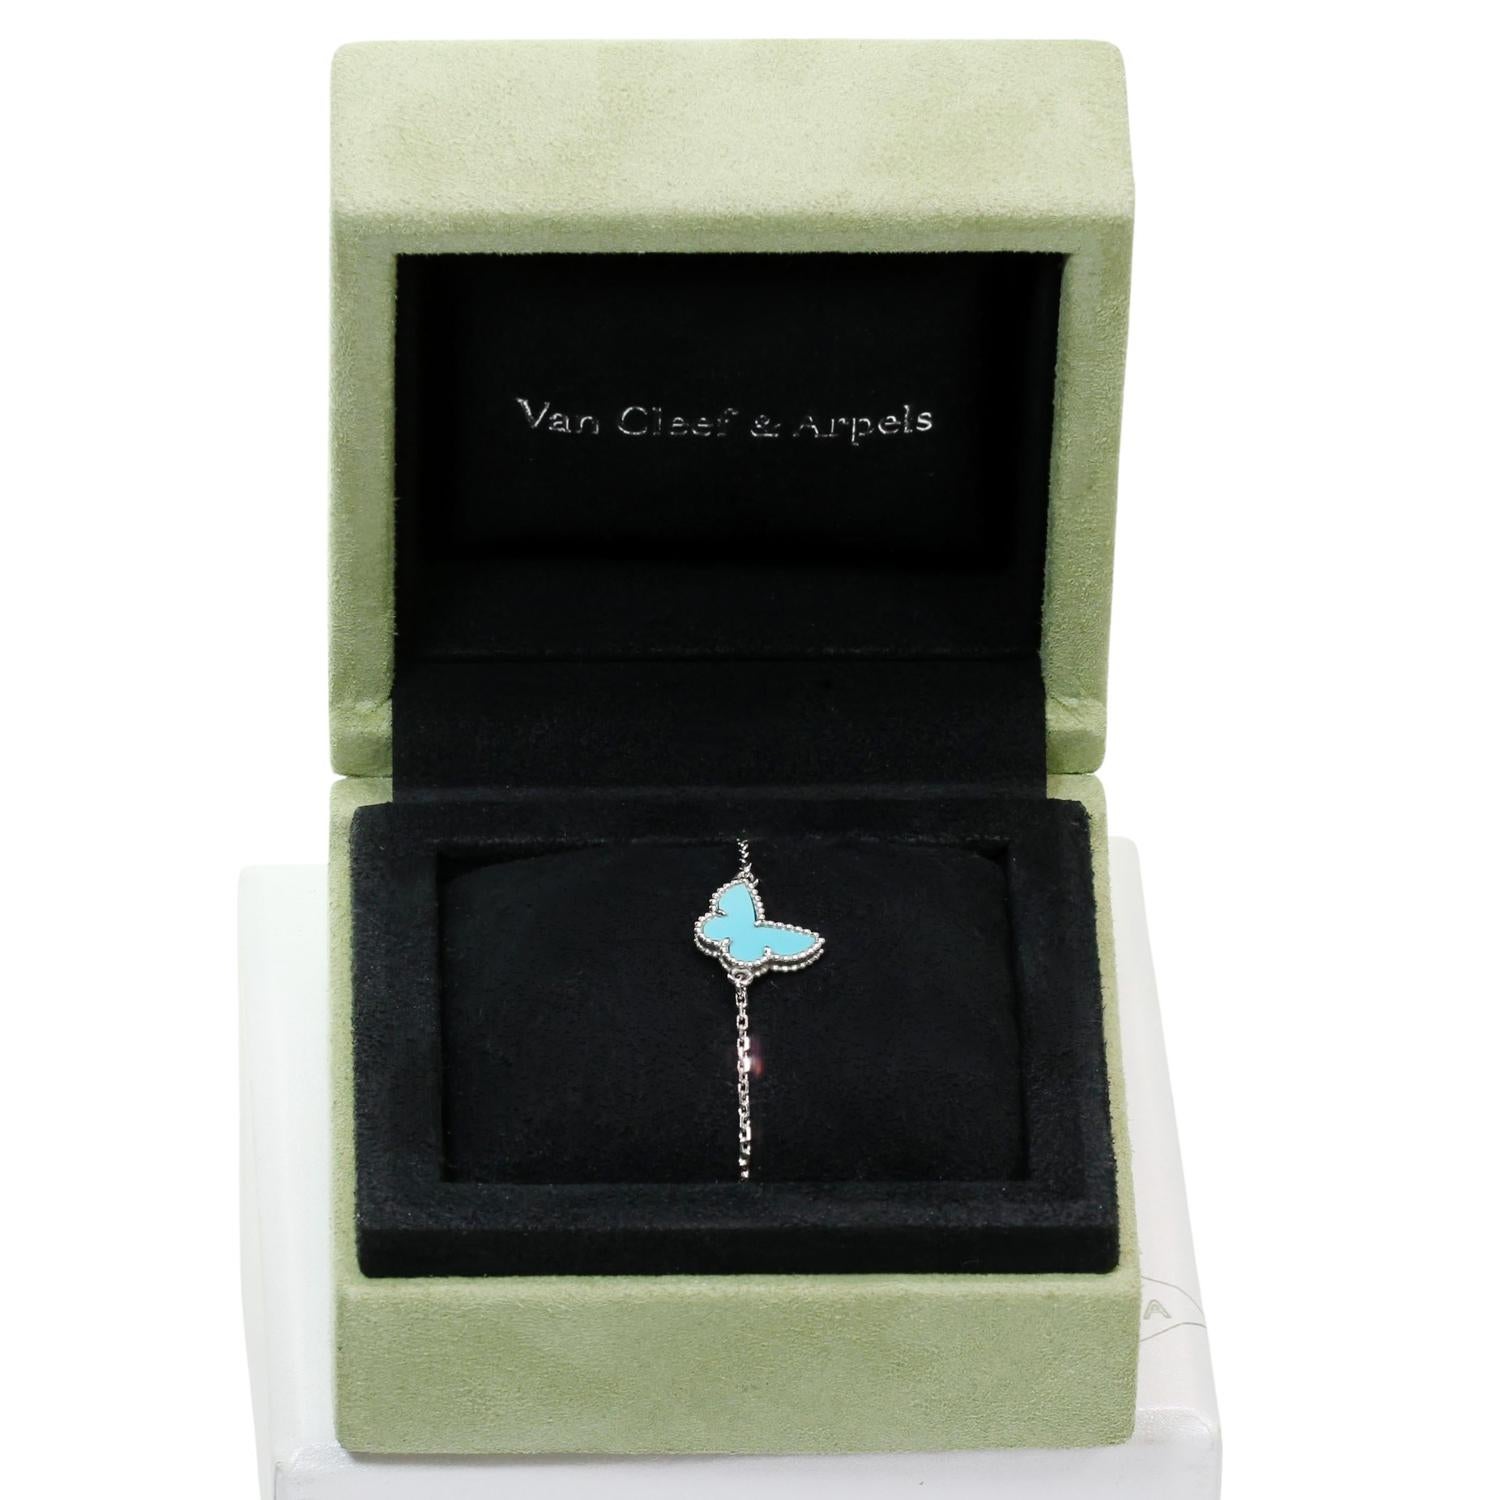 This stunning Van Cleef & Arpels bracelet from the iconic Sweet Alhambra collection feature a butterfly charm crafted in 18k white gold and set with blue turquoise. Made in France circa 2016. Excellent condition. Comes with original box and